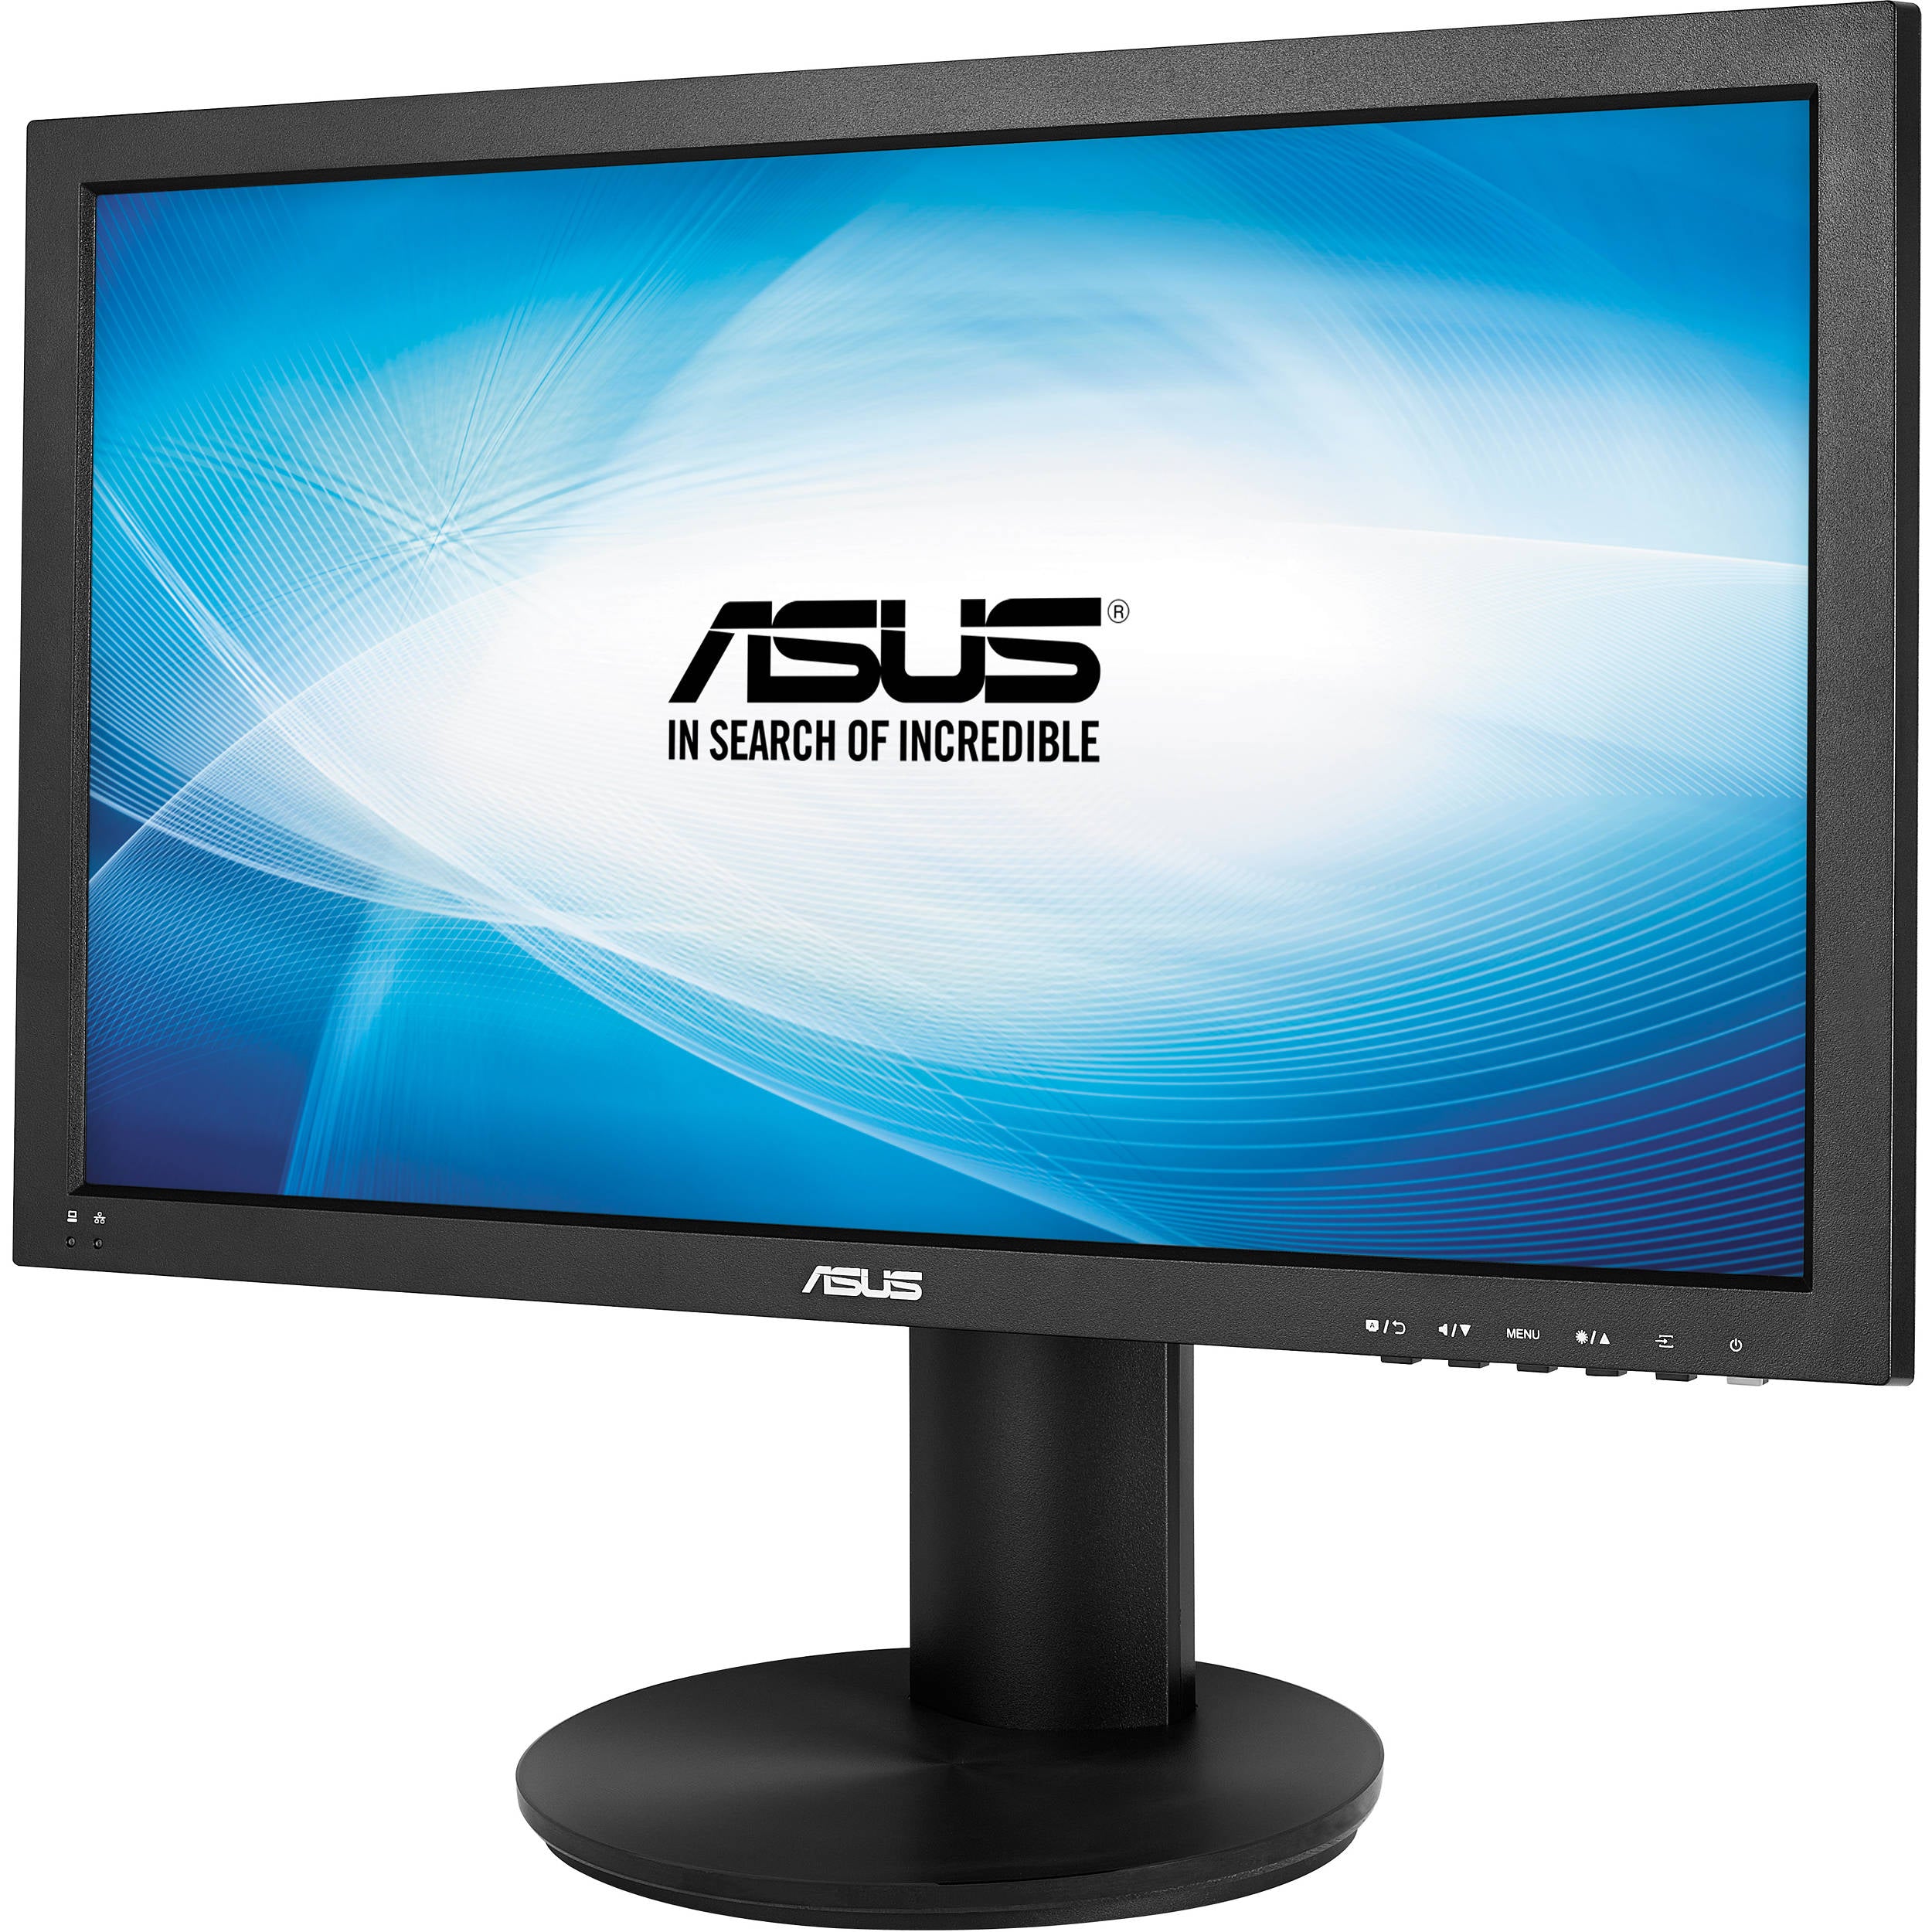 ASUS CP220-B Zero Client 22" LED Monitor - B Grade Certified Refurbished